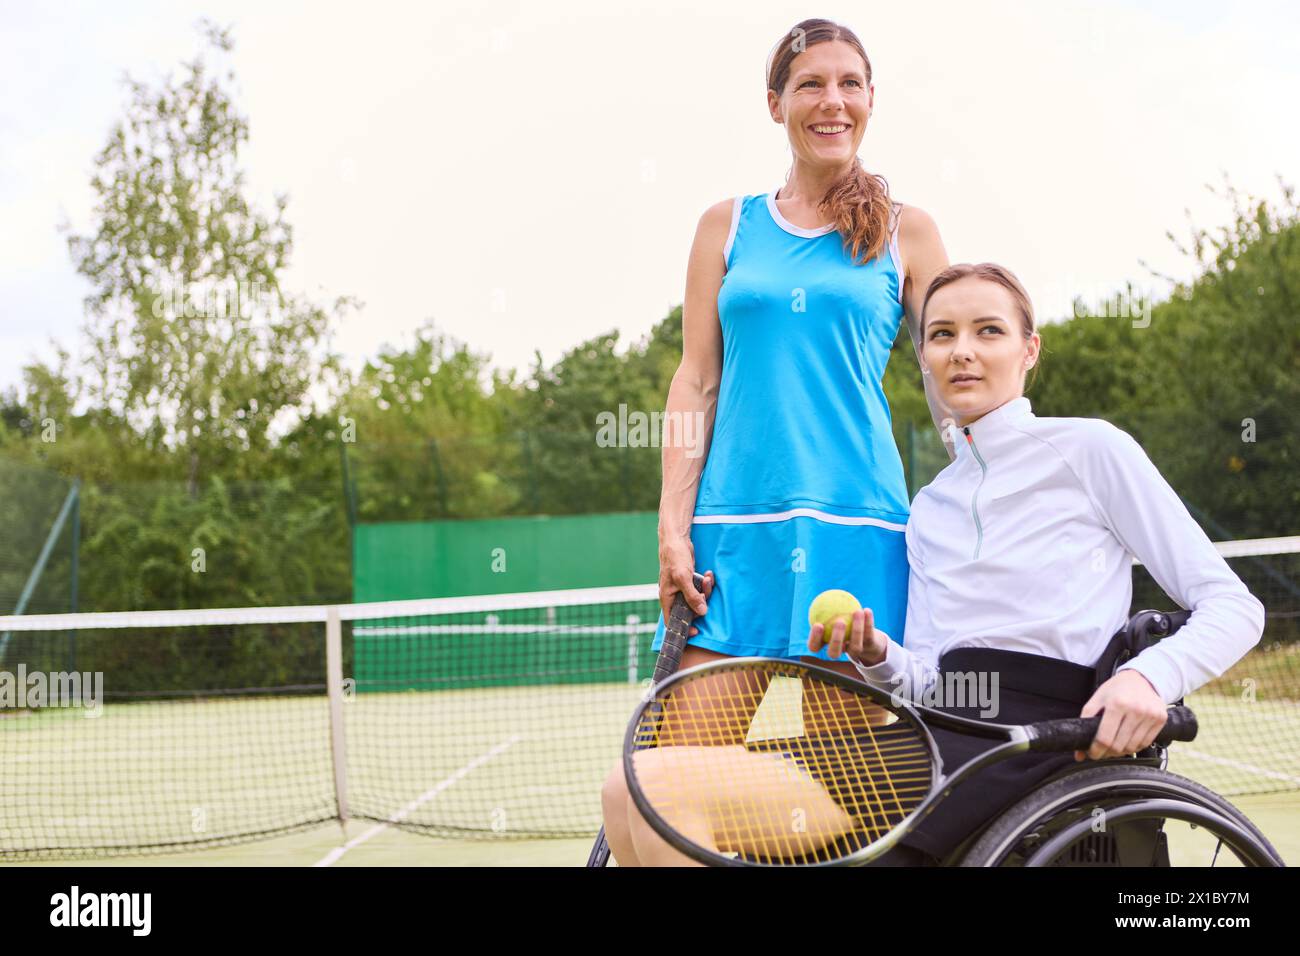 Two people spending time on a tennis court; one standing and one in a wheelchair, showcasing inclusion and active lifestyle. Stock Photo